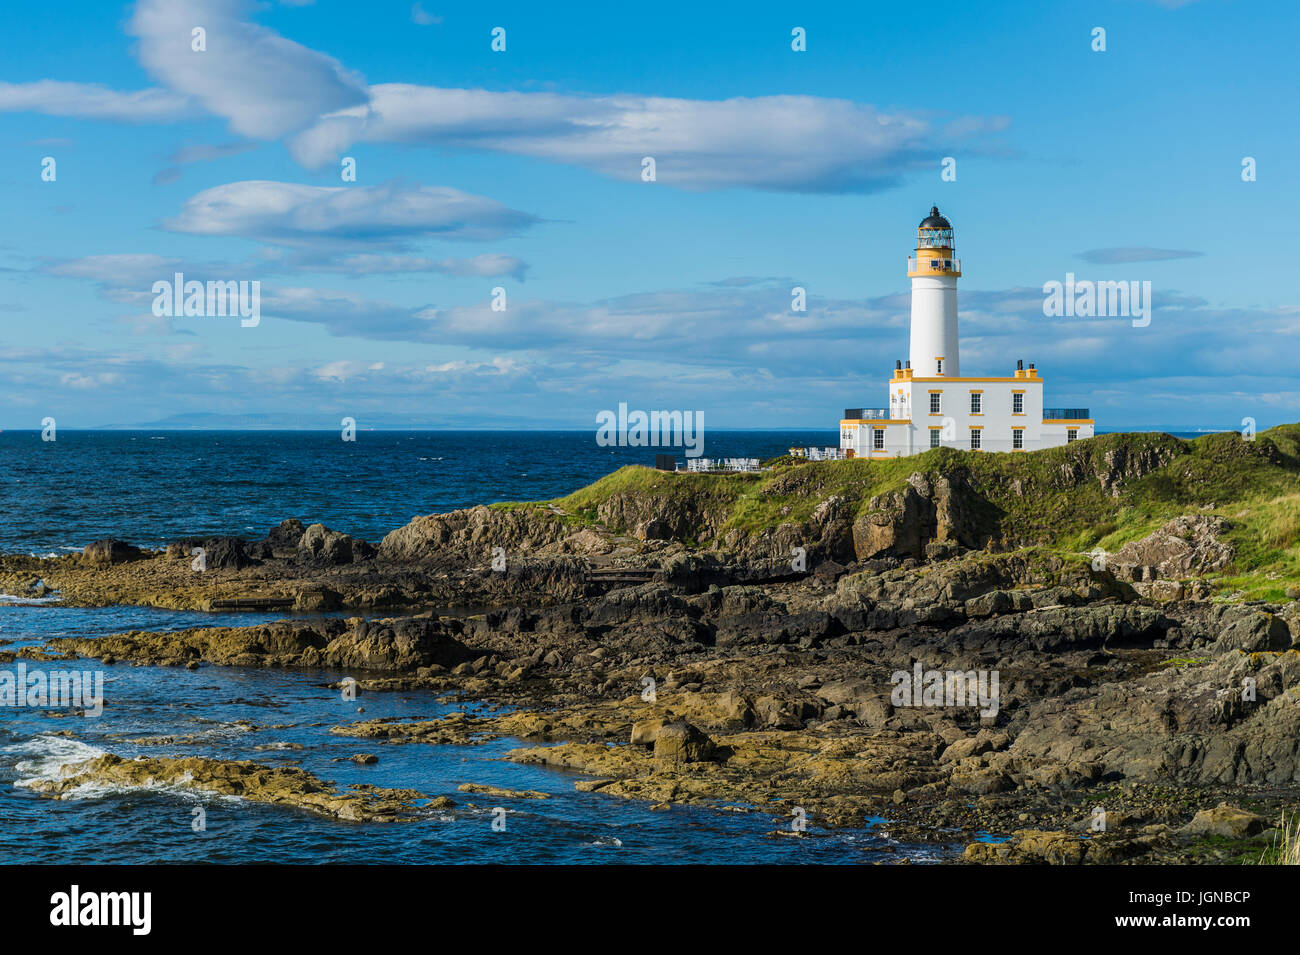 Turnberry, Scotland, UK - August 4, 2016: The old lighthouse at Turnberry which is now part of the Trump Turnberry Luxury Resort hotel. Stock Photo